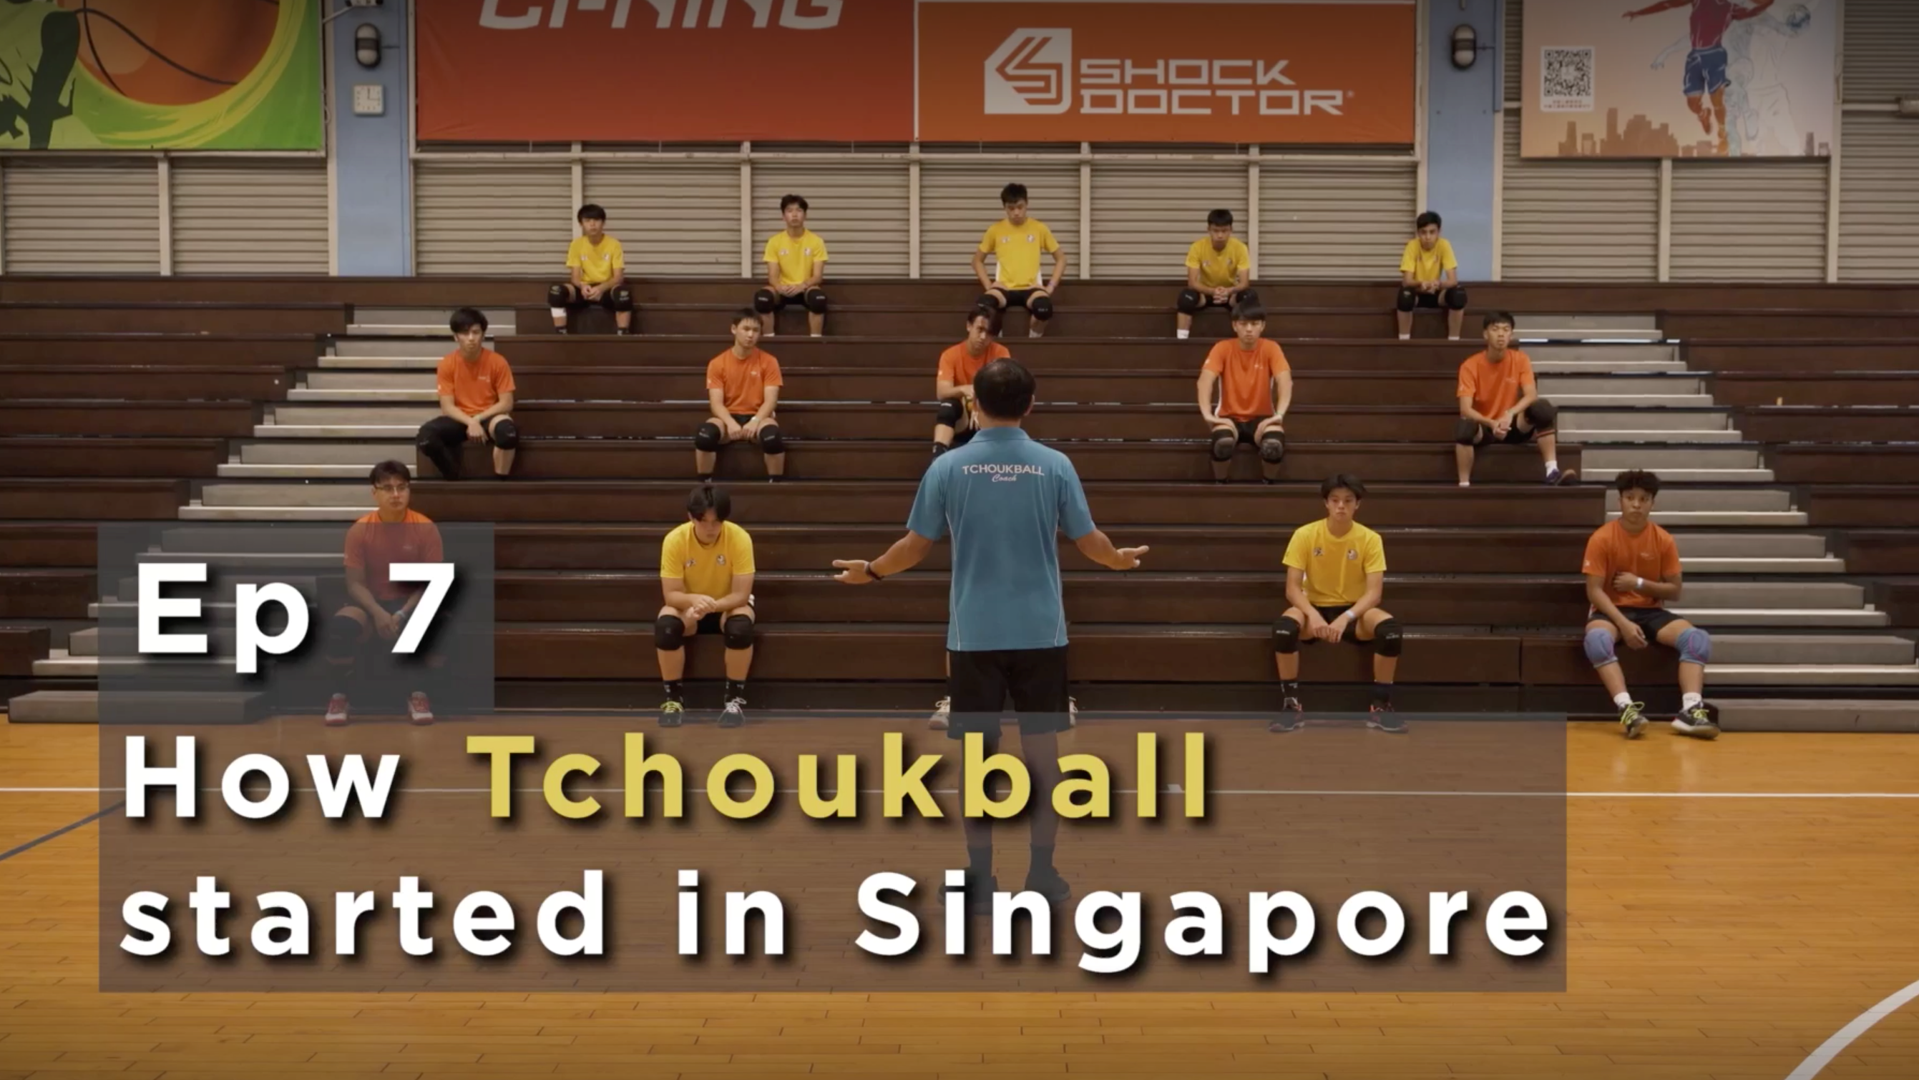 Ep 7 - How Tchoukball started in Singapore